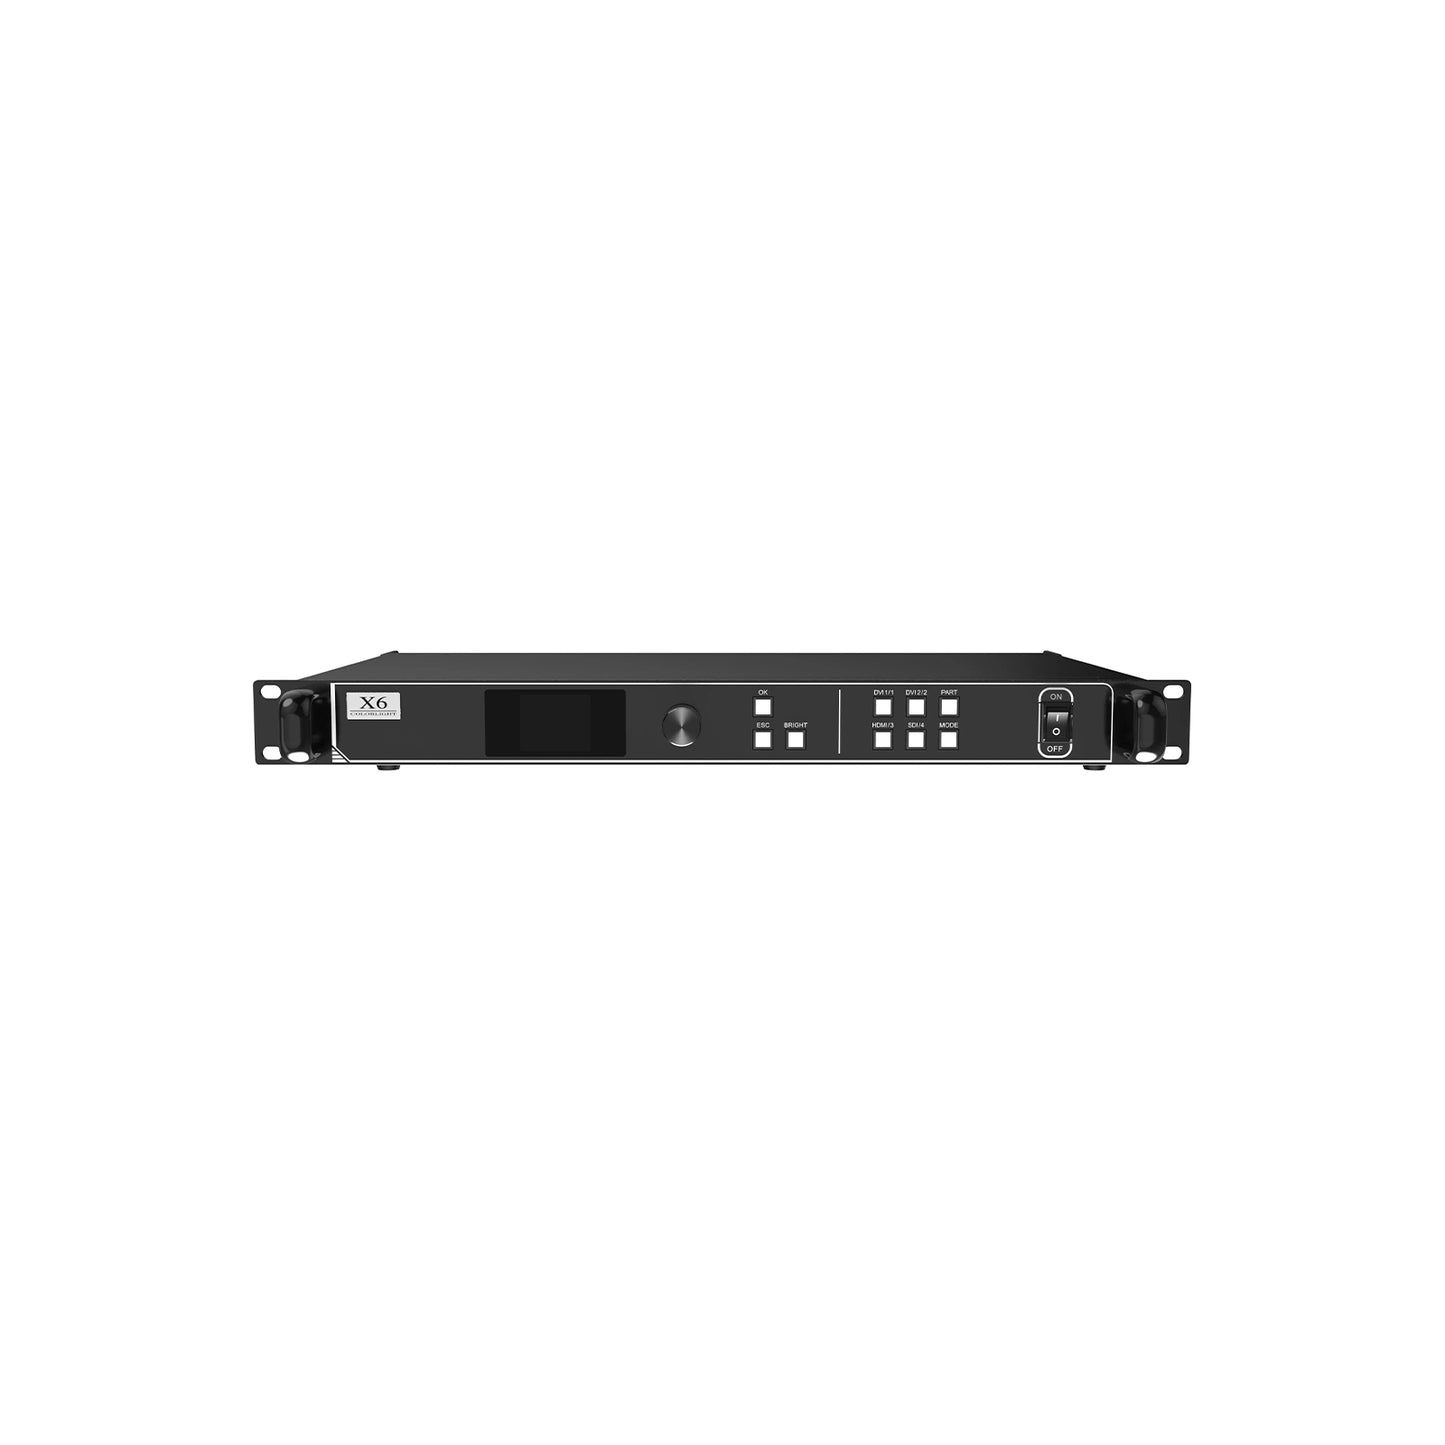 X6 Two-in-one LED Video Processor